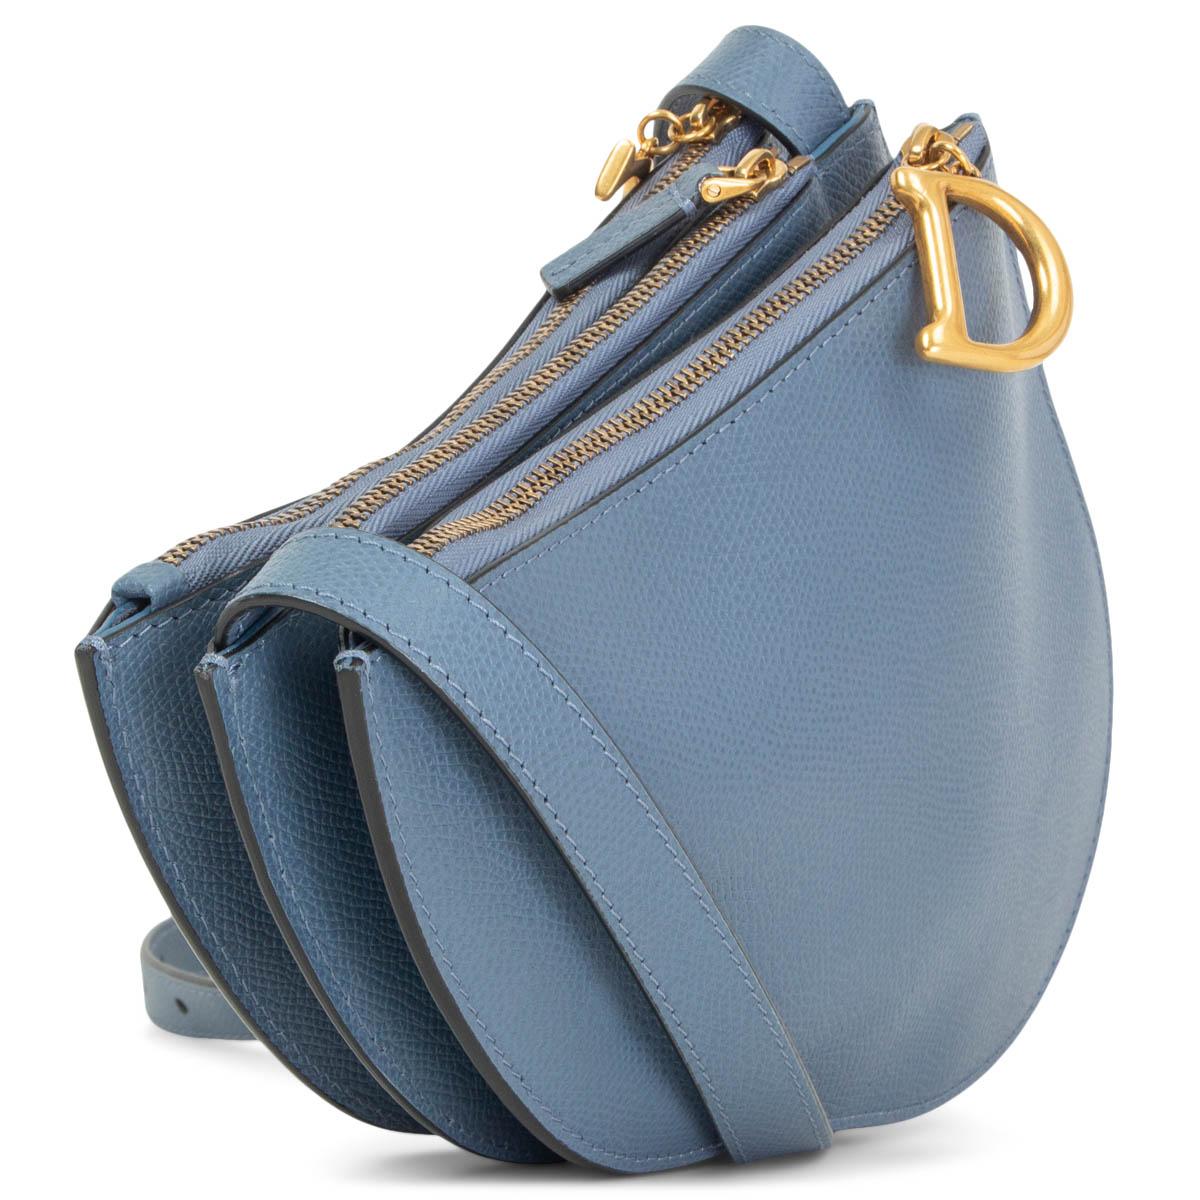 100% authentic Christian Dior Triple Zip Saddle crossbody bag in denim blue textured calfskin featuring a D&C charm on the outside zipper. Divided in three compartments and lined in denim blue suede. Comes with an adjustable shoulder strap. Has been